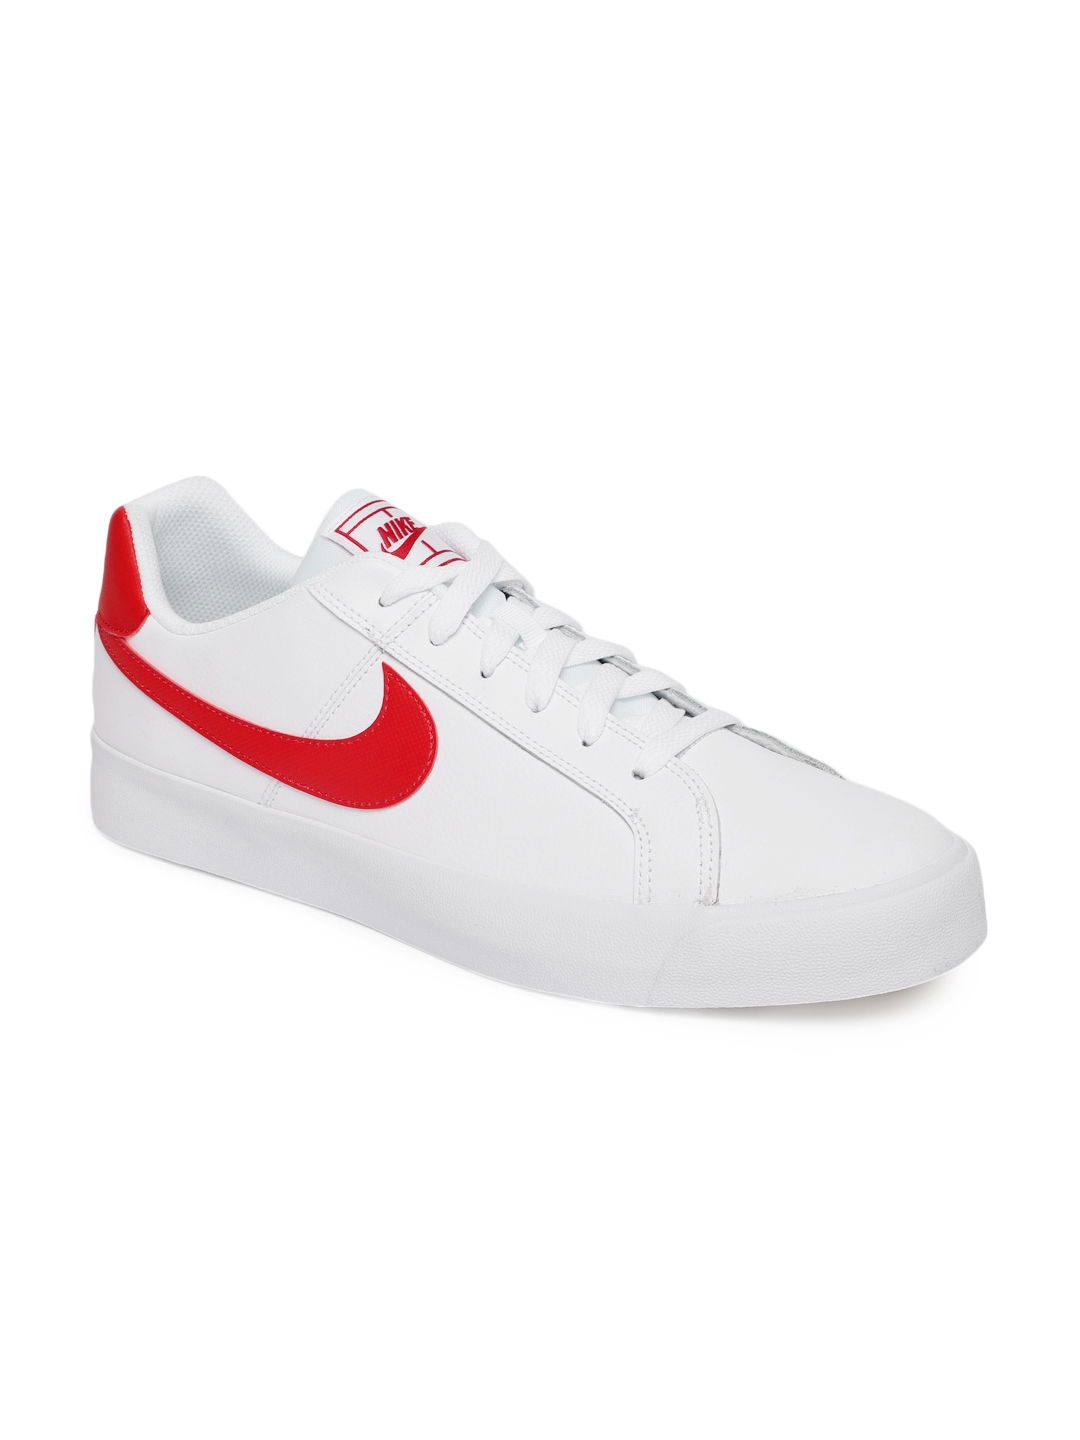 Buy Nike Men White COURT ROYALE Leather Sneakers - Casual Shoes for Men ...